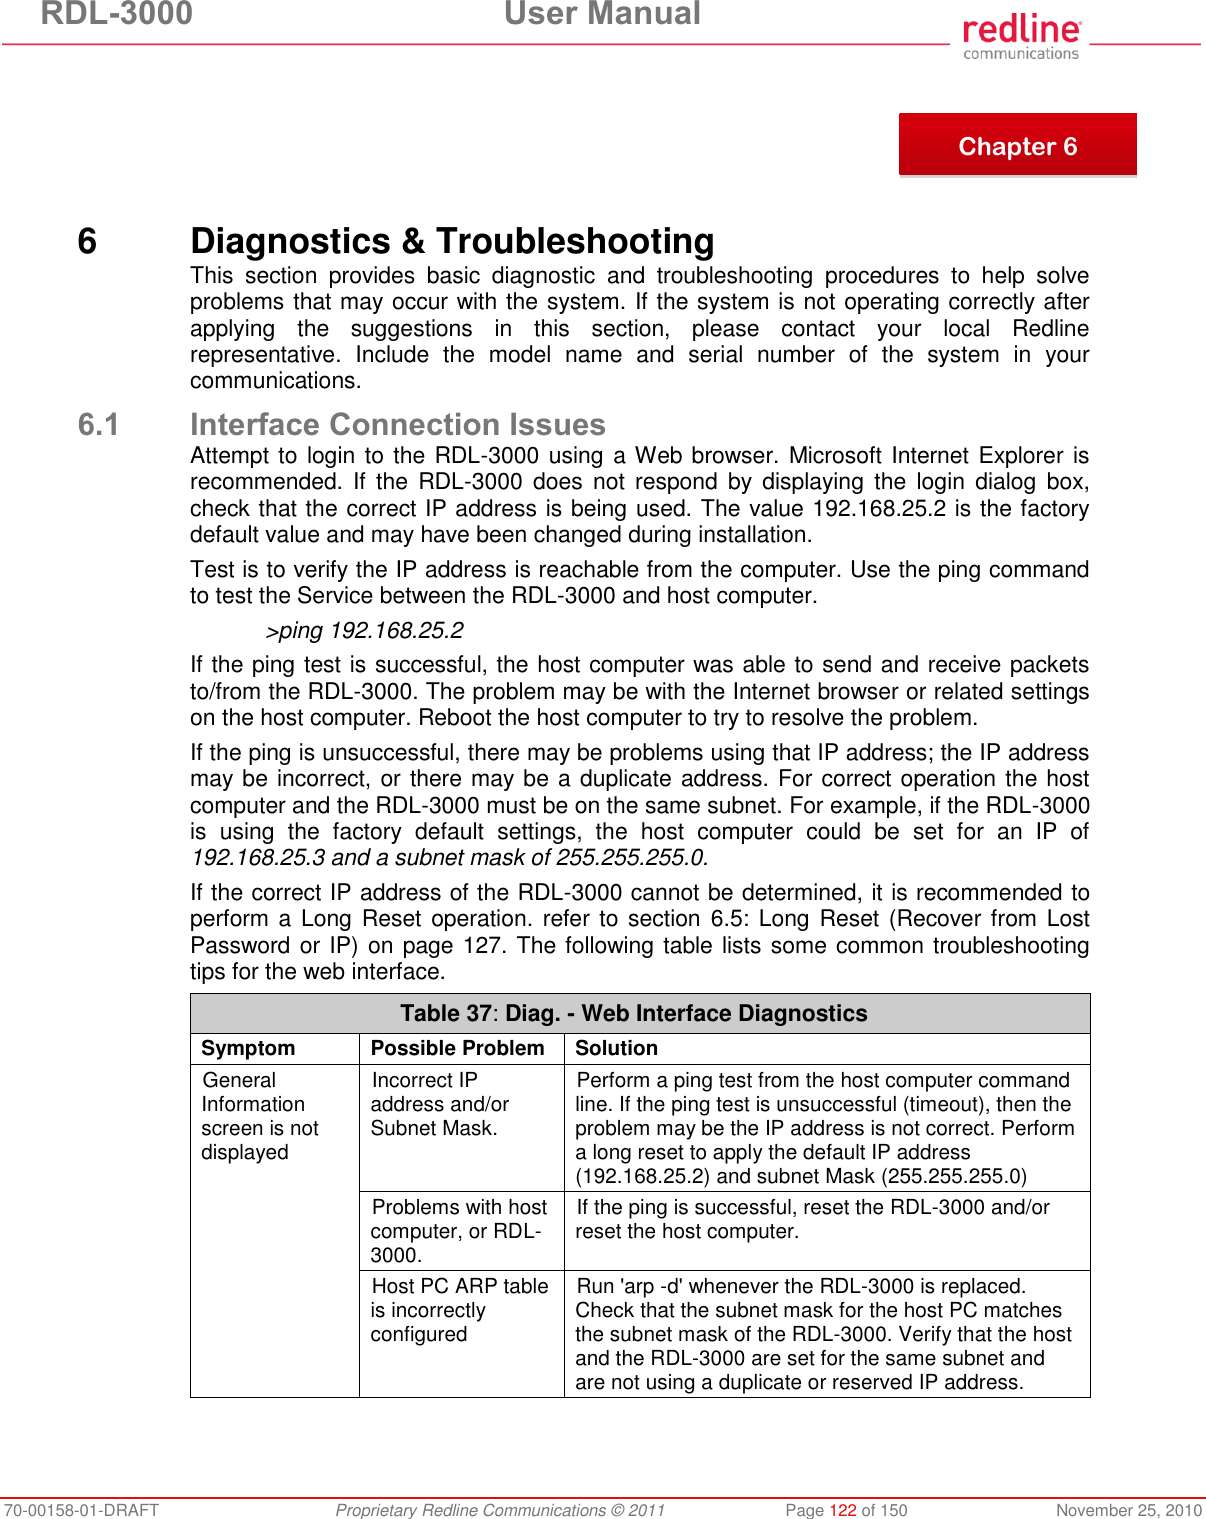 RDL-3000  User Manual 70-00158-01-DRAFT  Proprietary Redline Communications © 2011  Page 122 of 150  November 25, 2010       6  Diagnostics &amp; Troubleshooting This  section  provides  basic  diagnostic  and  troubleshooting  procedures  to  help  solve problems that may occur with the system. If the system is not operating correctly after applying  the  suggestions  in  this  section,  please  contact  your  local  Redline representative.  Include  the  model  name  and  serial  number  of  the  system  in  your communications. 6.1 Interface Connection Issues Attempt to login to the RDL-3000 using  a Web browser. Microsoft Internet Explorer is recommended.  If  the  RDL-3000  does  not  respond by  displaying  the  login  dialog  box, check that the correct IP address is being used. The value 192.168.25.2 is the factory default value and may have been changed during installation. Test is to verify the IP address is reachable from the computer. Use the ping command to test the Service between the RDL-3000 and host computer. &gt;ping 192.168.25.2 If the ping test is successful, the host computer was able to send and receive packets to/from the RDL-3000. The problem may be with the Internet browser or related settings on the host computer. Reboot the host computer to try to resolve the problem. If the ping is unsuccessful, there may be problems using that IP address; the IP address may be incorrect, or there may be a duplicate address. For correct operation the host computer and the RDL-3000 must be on the same subnet. For example, if the RDL-3000 is  using  the  factory  default  settings,  the  host  computer  could  be  set  for  an  IP  of 192.168.25.3 and a subnet mask of 255.255.255.0. If the correct IP address of the RDL-3000 cannot be determined, it is recommended to perform a  Long Reset operation. refer to section  6.5:  Long Reset (Recover from Lost Password or IP) on page 127. The following table lists some common troubleshooting tips for the web interface. Table 37: Diag. - Web Interface Diagnostics Symptom Possible Problem Solution General Information screen is not displayed Incorrect IP address and/or Subnet Mask. Perform a ping test from the host computer command line. If the ping test is unsuccessful (timeout), then the problem may be the IP address is not correct. Perform a long reset to apply the default IP address (192.168.25.2) and subnet Mask (255.255.255.0) Problems with host computer, or RDL-3000. If the ping is successful, reset the RDL-3000 and/or reset the host computer. Host PC ARP table is incorrectly configured Run &apos;arp -d&apos; whenever the RDL-3000 is replaced. Check that the subnet mask for the host PC matches the subnet mask of the RDL-3000. Verify that the host and the RDL-3000 are set for the same subnet and are not using a duplicate or reserved IP address.   Chapter 6 